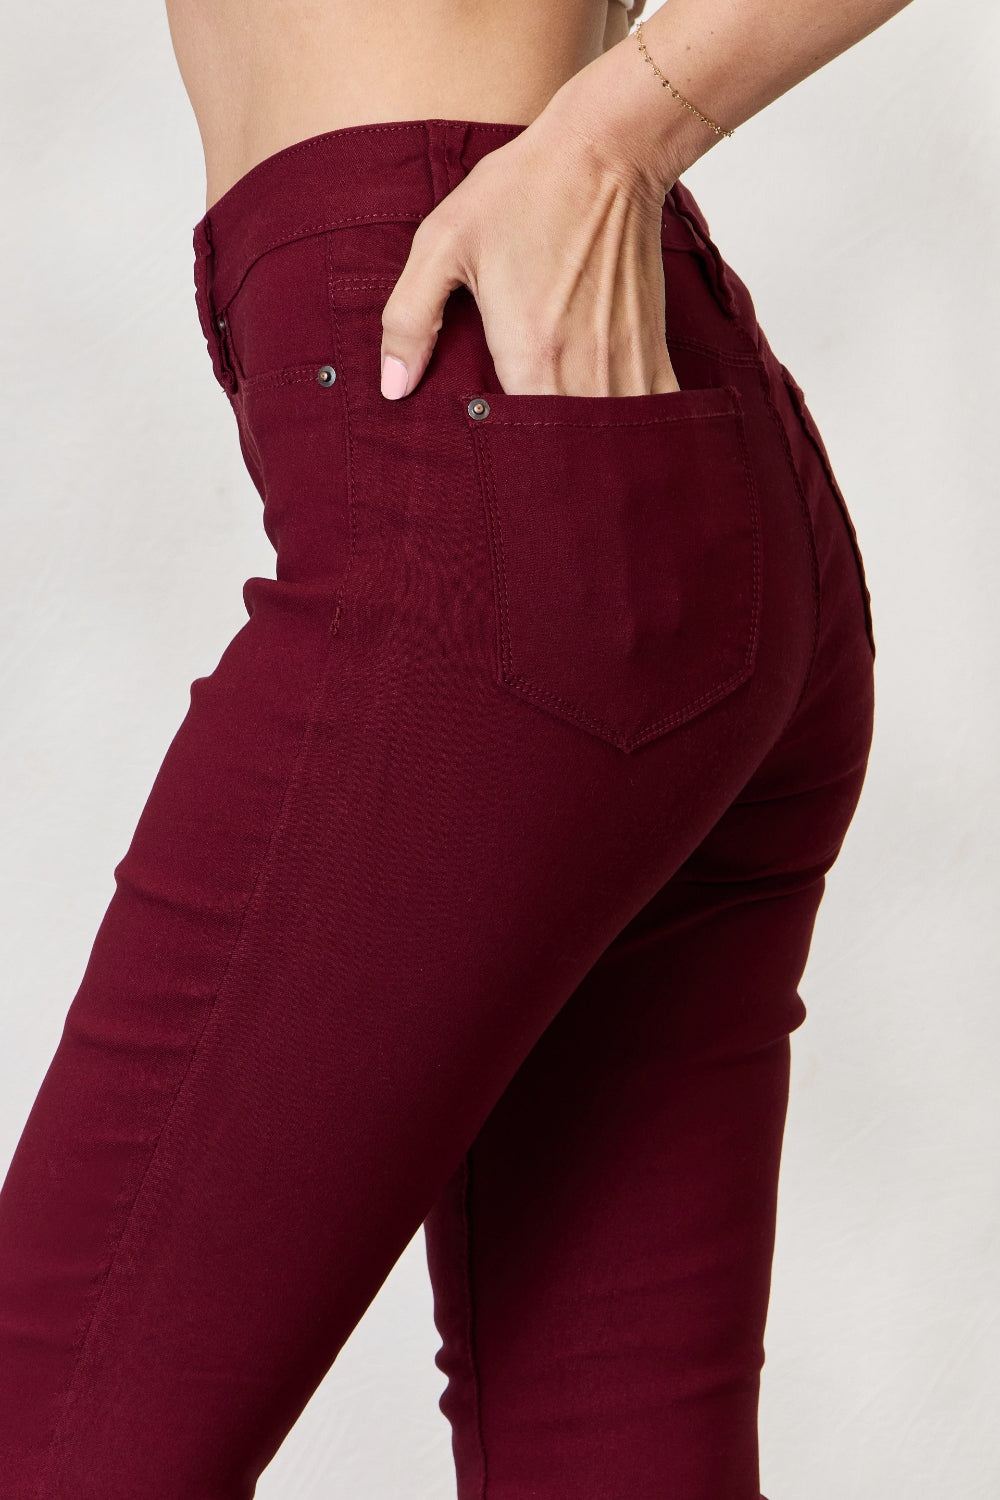 YMI Jeans Hyperstretch Skinny Jeans - Wine - Inspired Eye Boutique